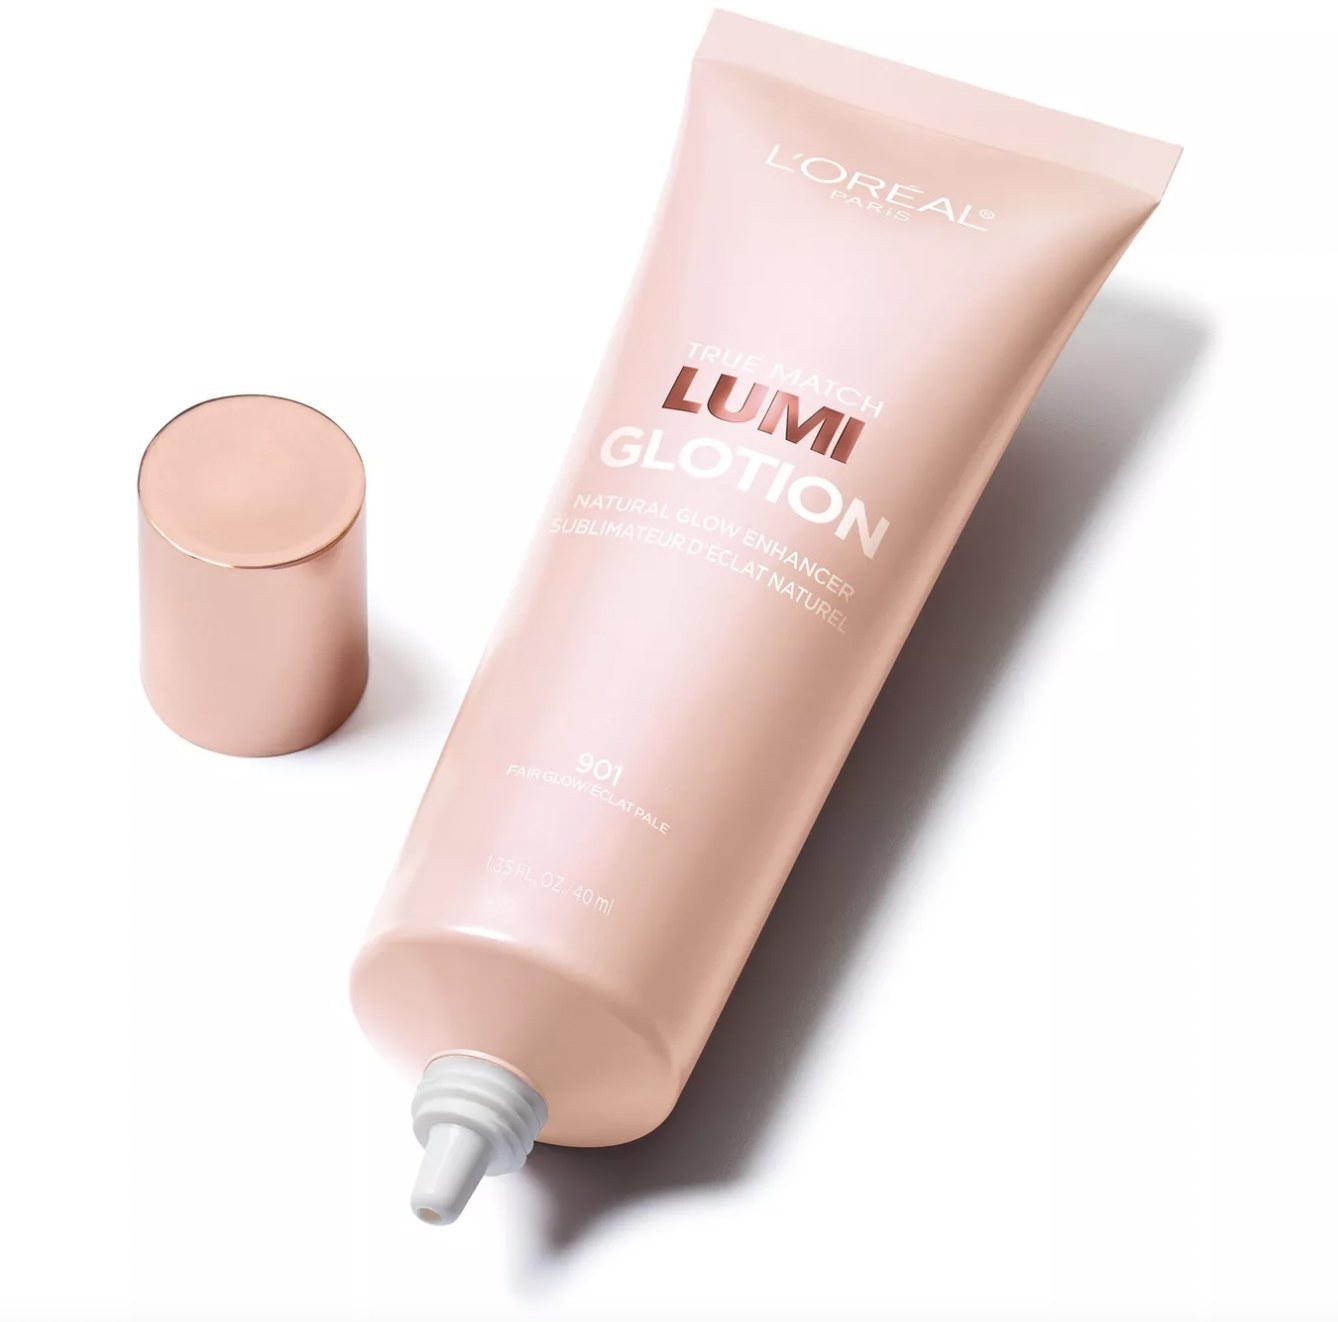 A tube of tinted moisturizer